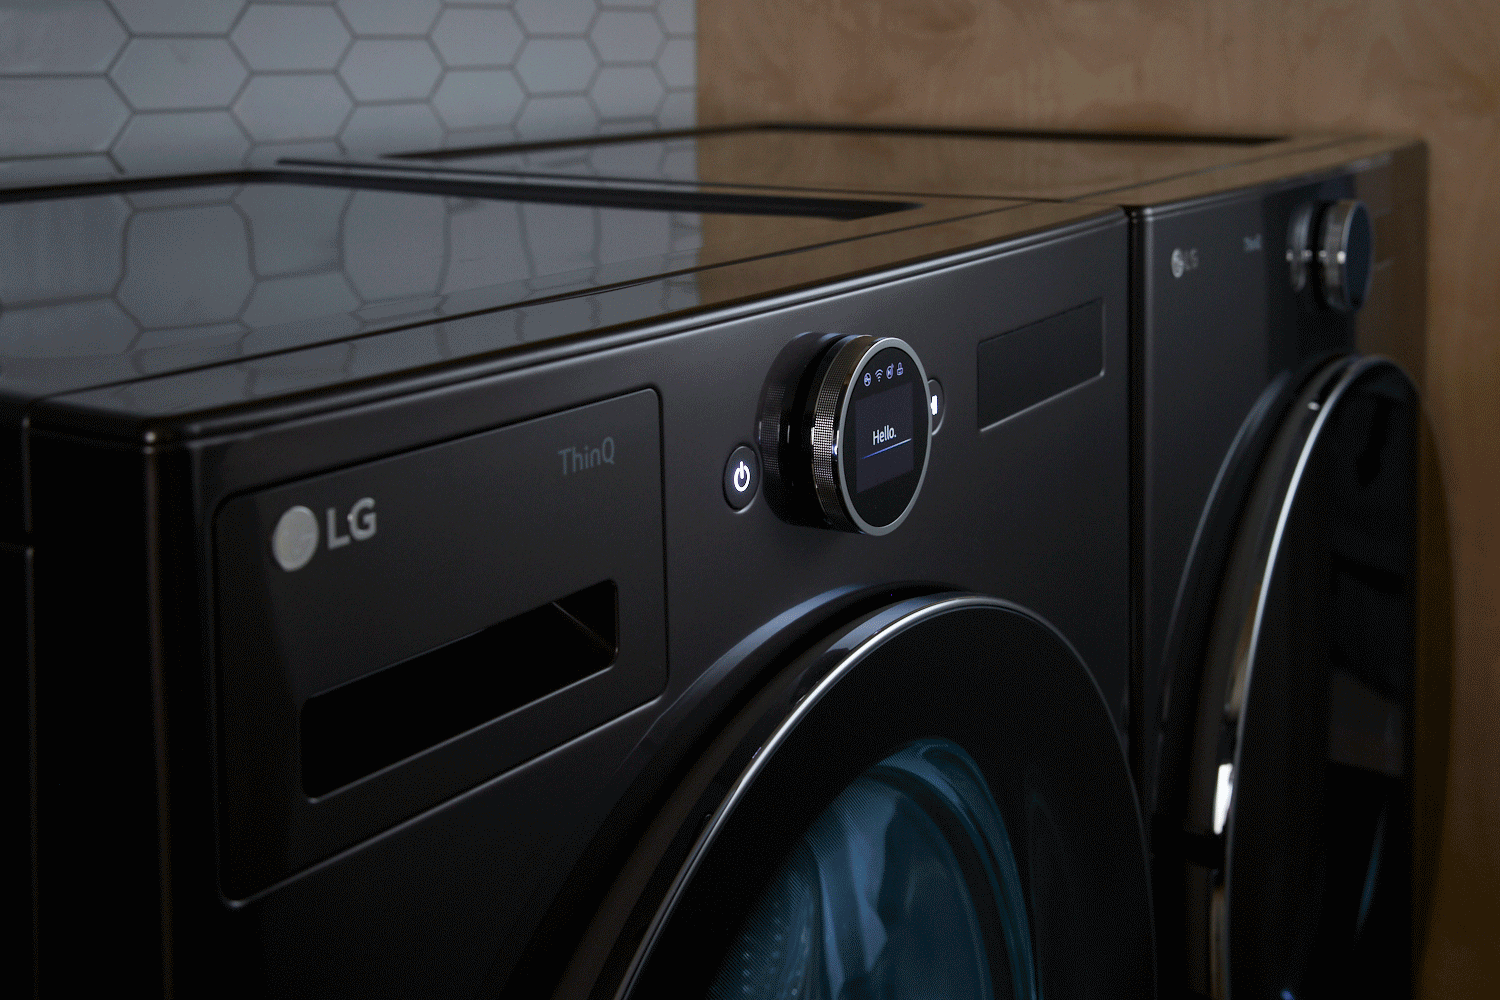 The LG WM6700HBA front load washer and LG DLEX6700B dryer in a laundry room 